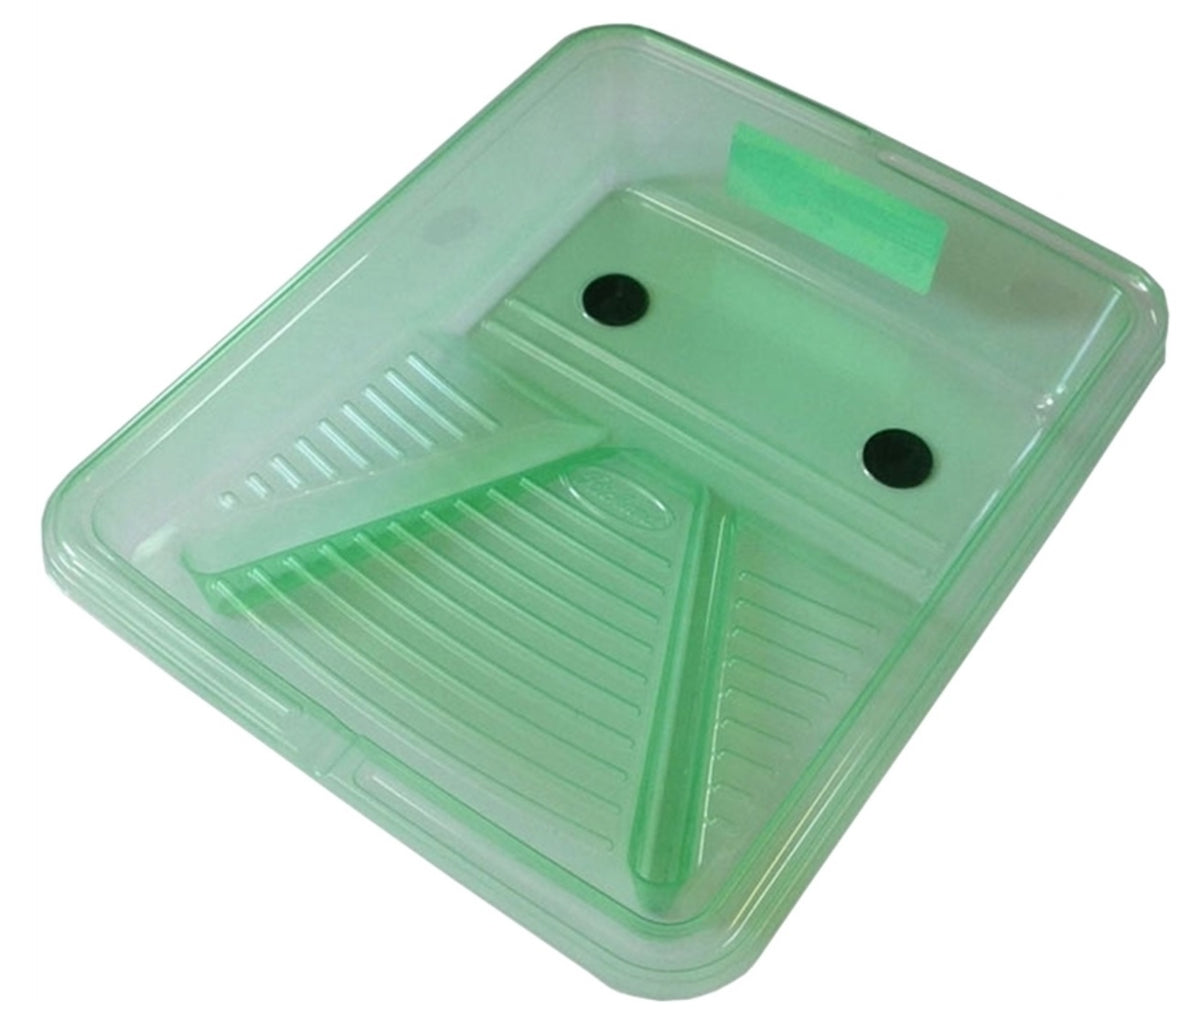 Richard 92104 2 In 1 Tray & Cover, 2 Liter Capacity